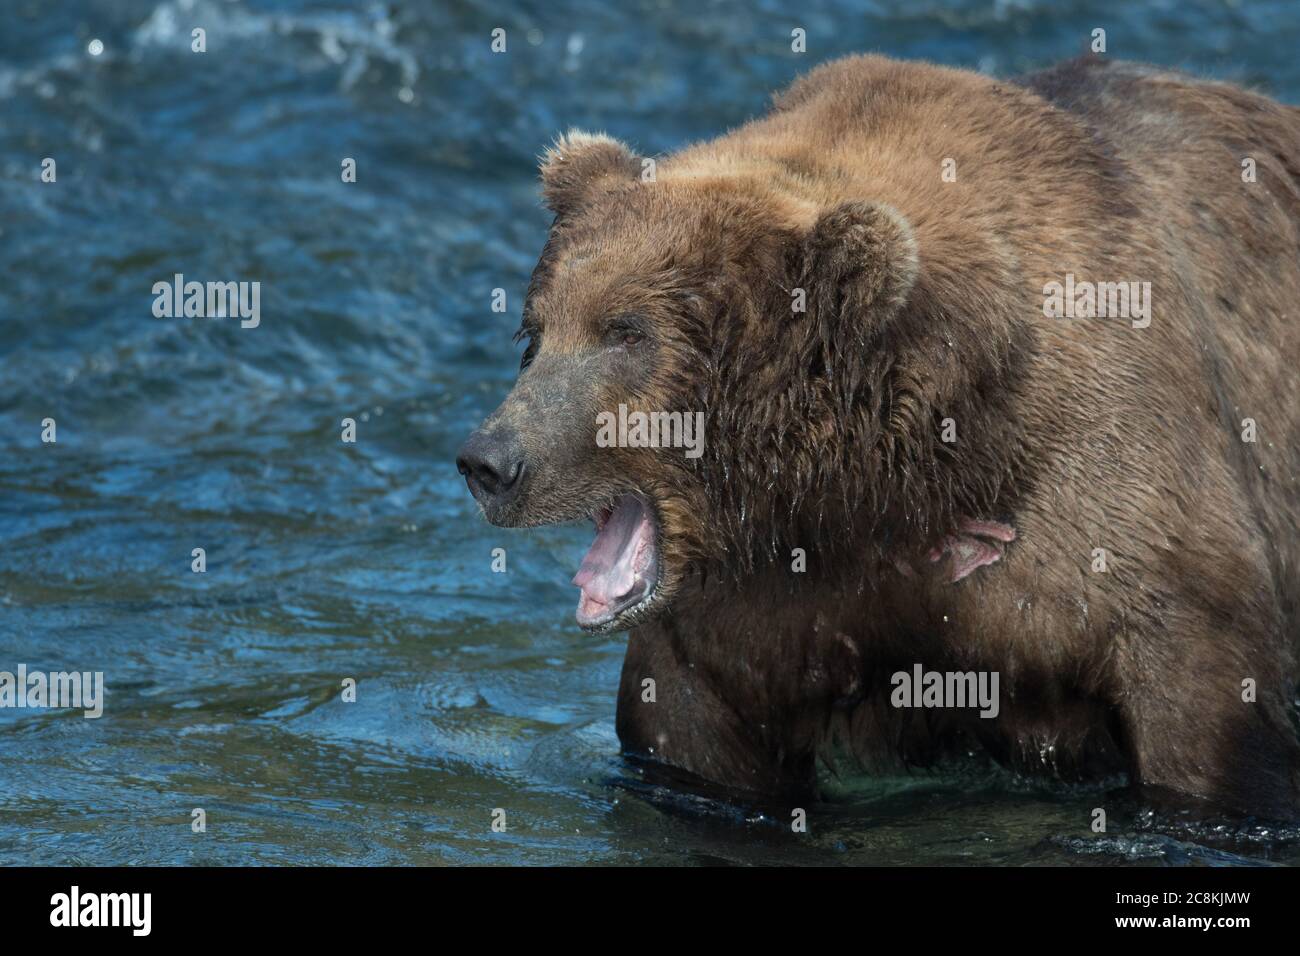 Large Alaskan brown bear with its mouth open standing in Brooks RIver in Katmai National Park, Alaska Stock Photo